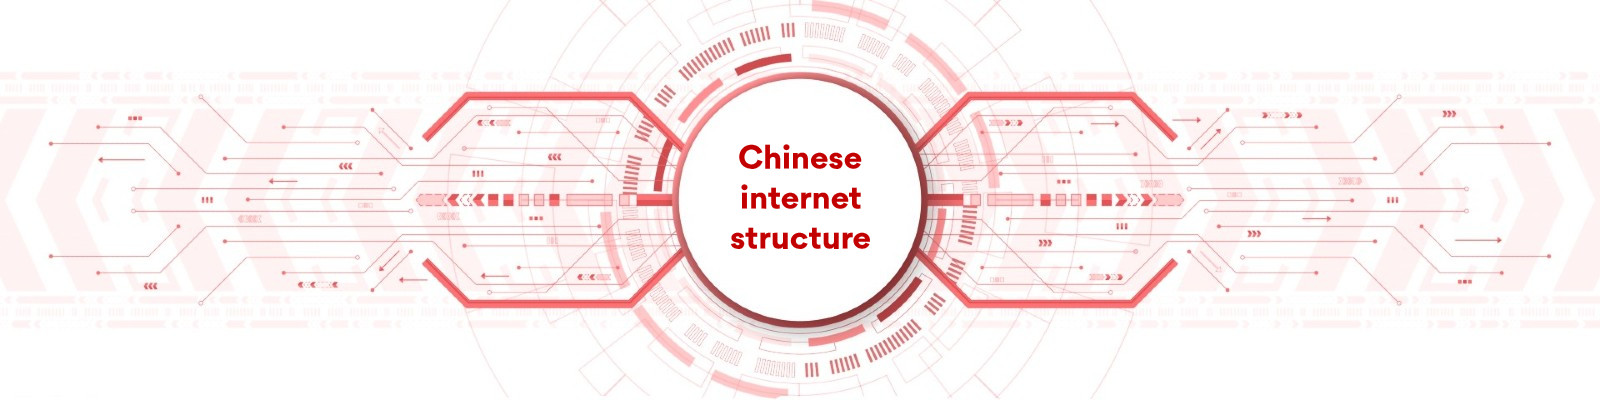 Chinese internet structure